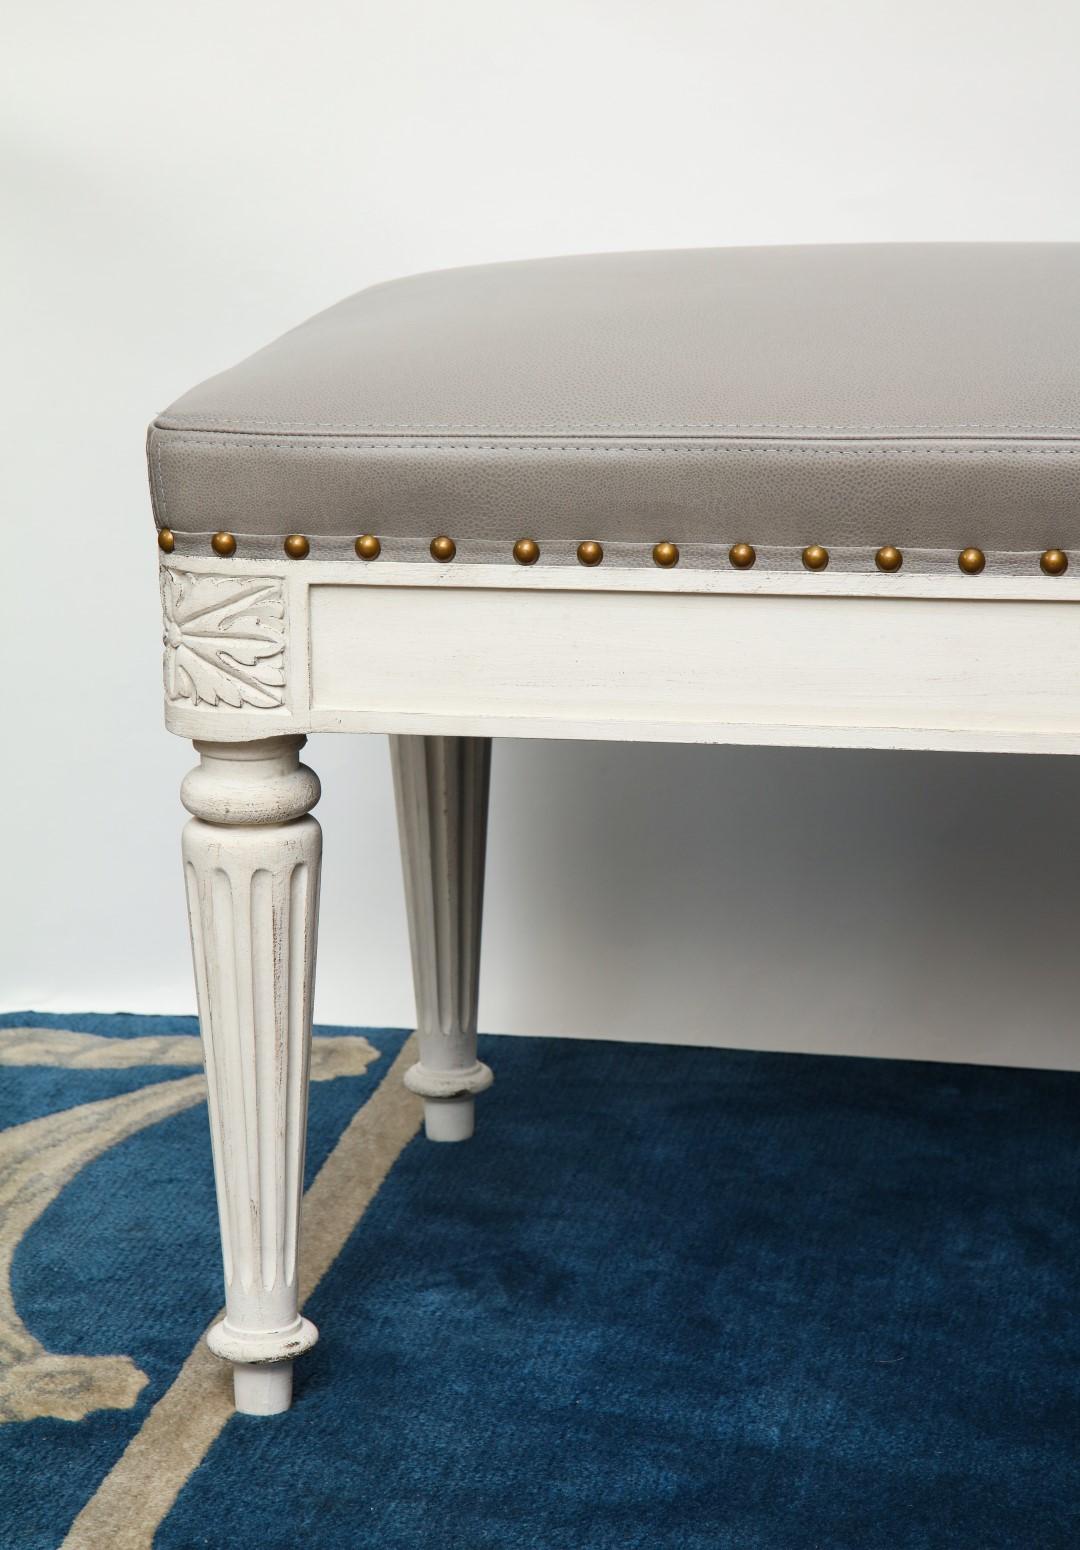 The Montreuil Bench, a custom bench designed by David Duncan. This Louis XVI-style, rectangular bench features a leather upholstered seat trimmed with nail heads above apron. With rounded corners that showcase hand carved rosettes, the bench also